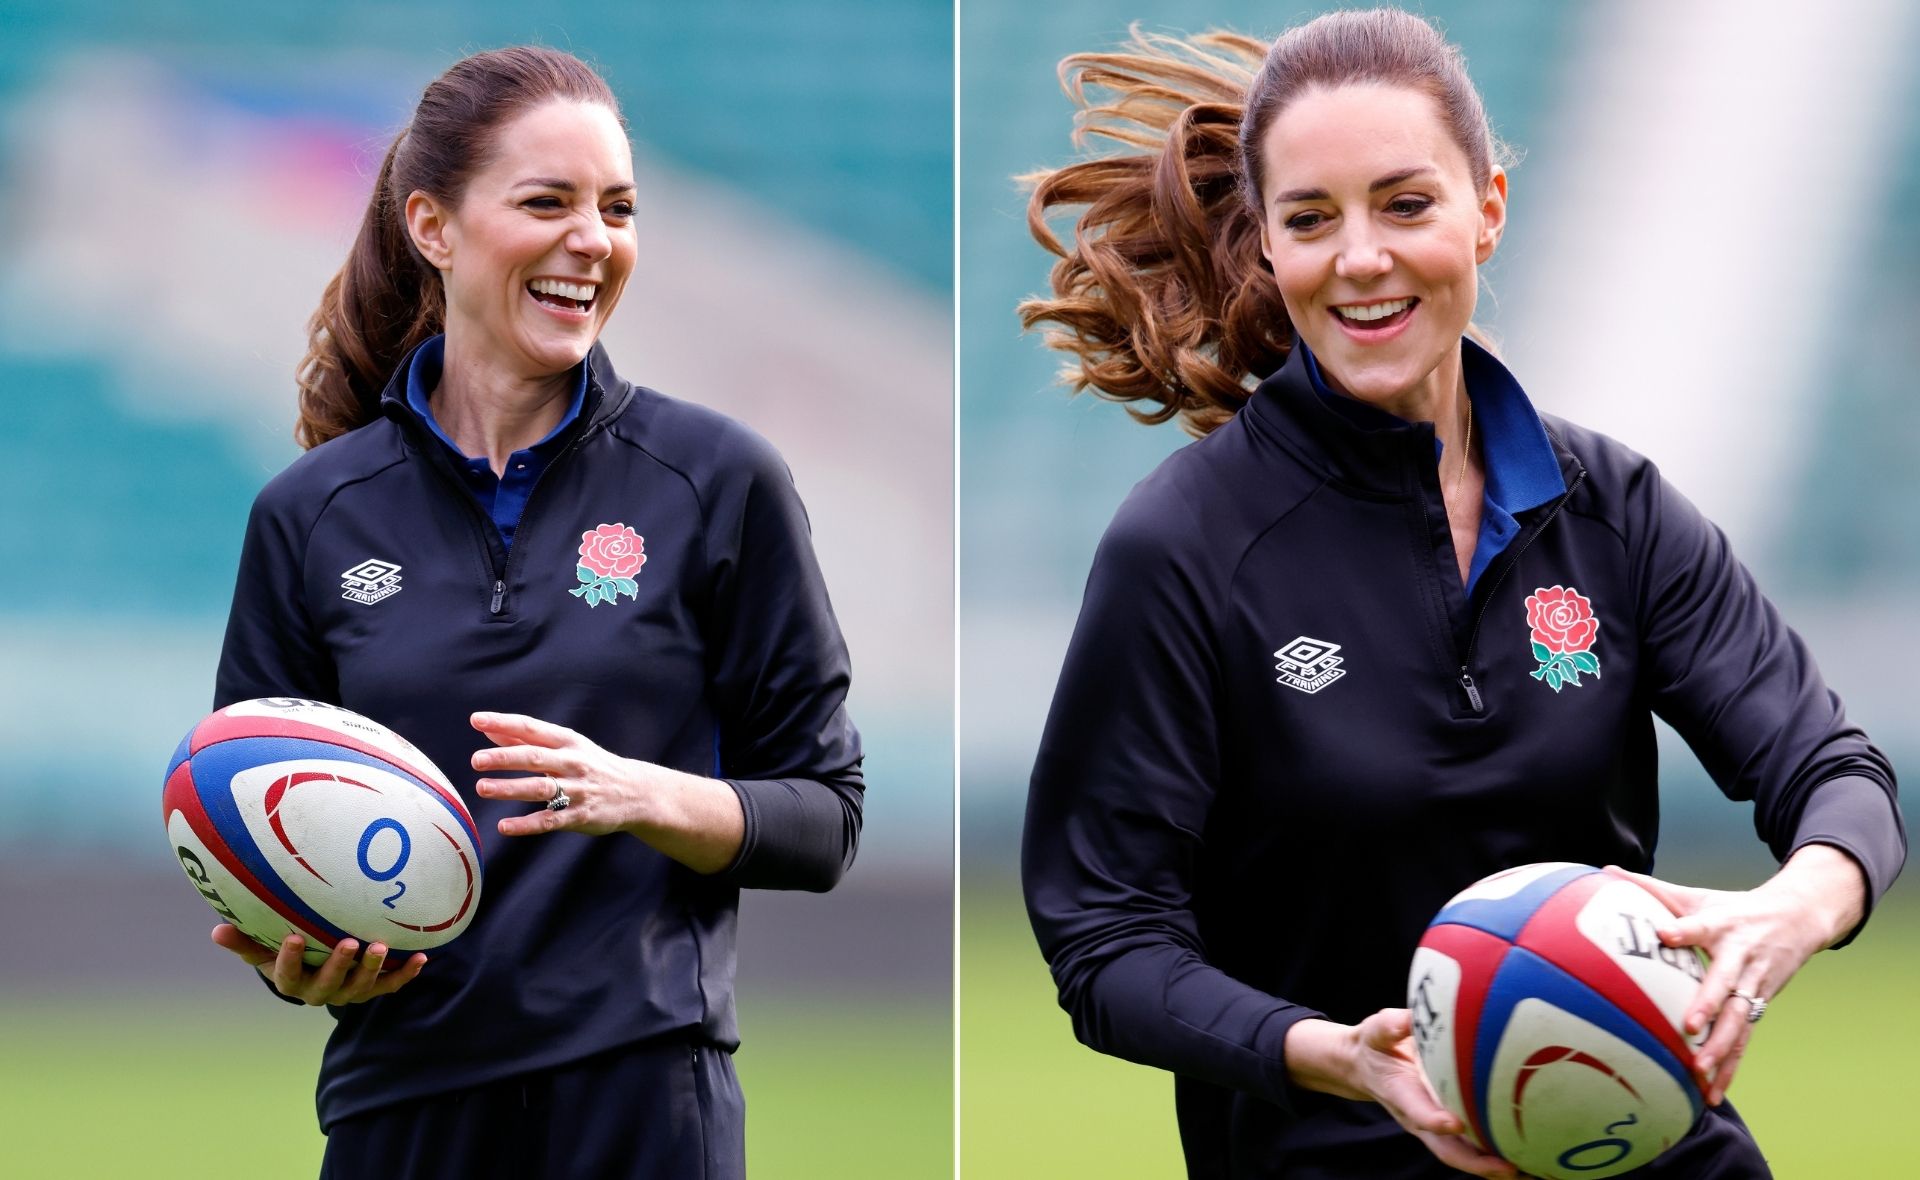 Catherine, Duchess of Cambridge officially takes over Prince Harry’s royal rugby patronage